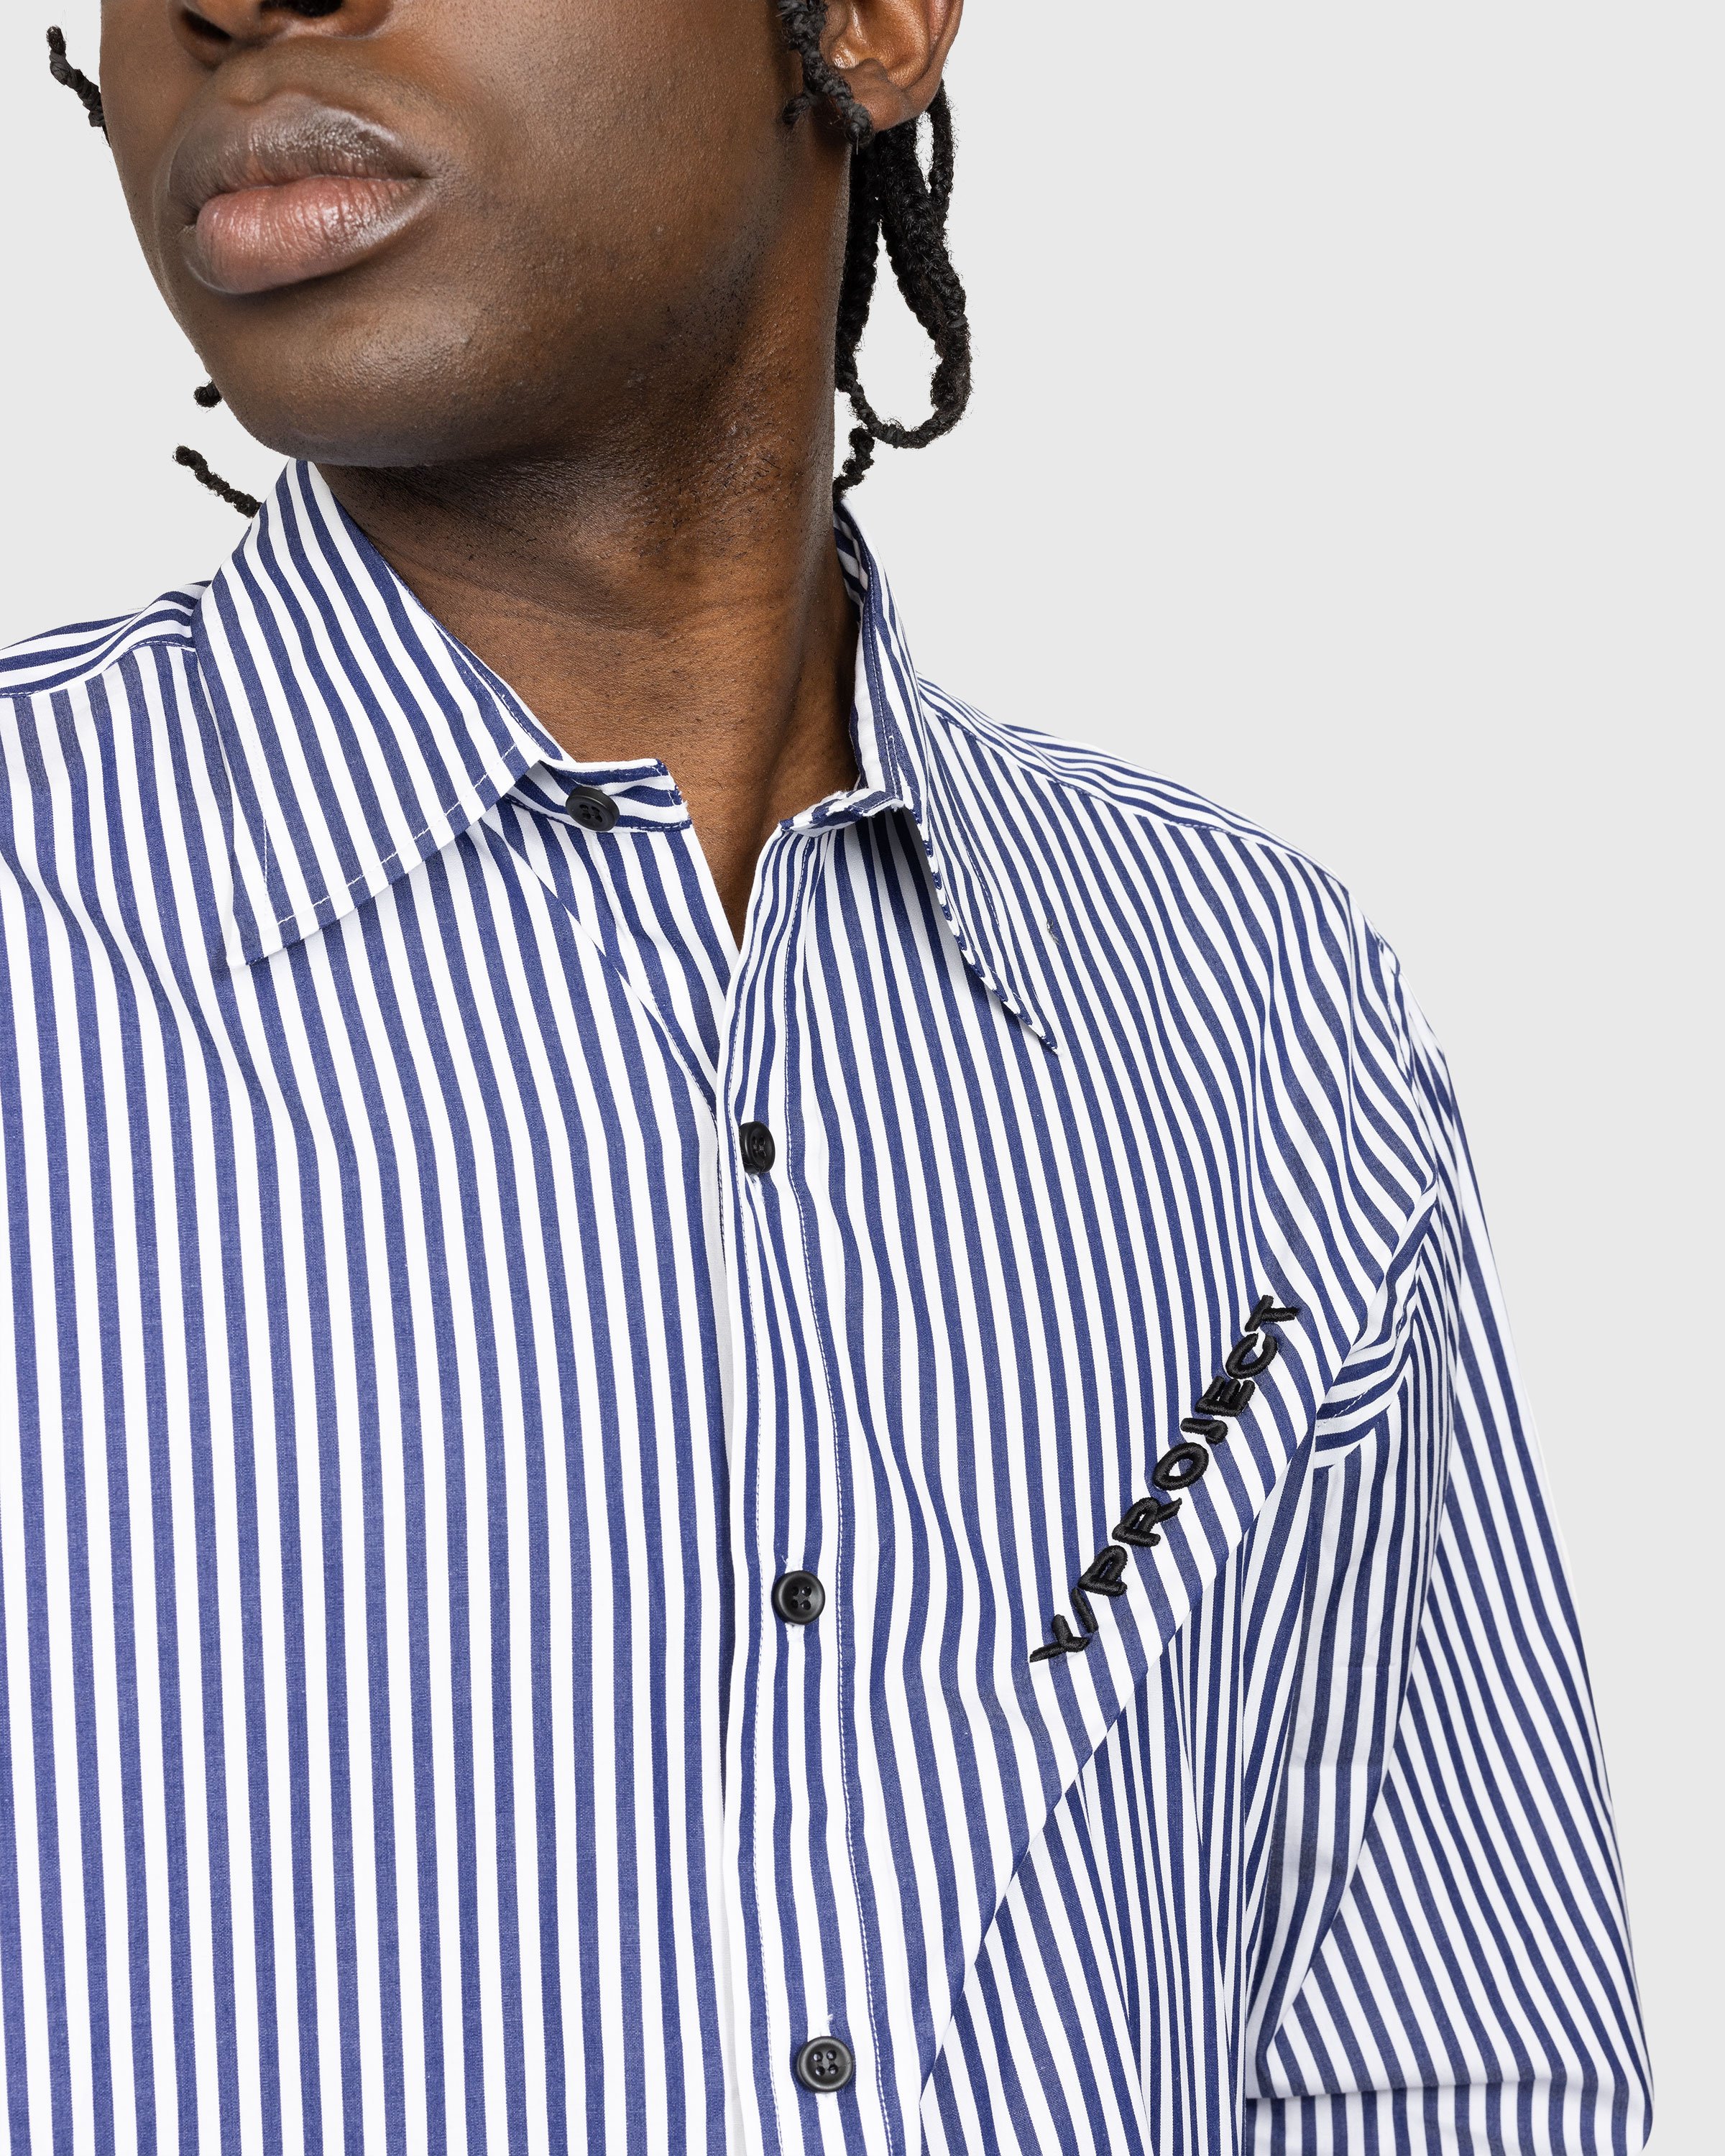 Y/Project - Pinched Logo Stripe Shirt Navy/White - Clothing - Blue - Image 4